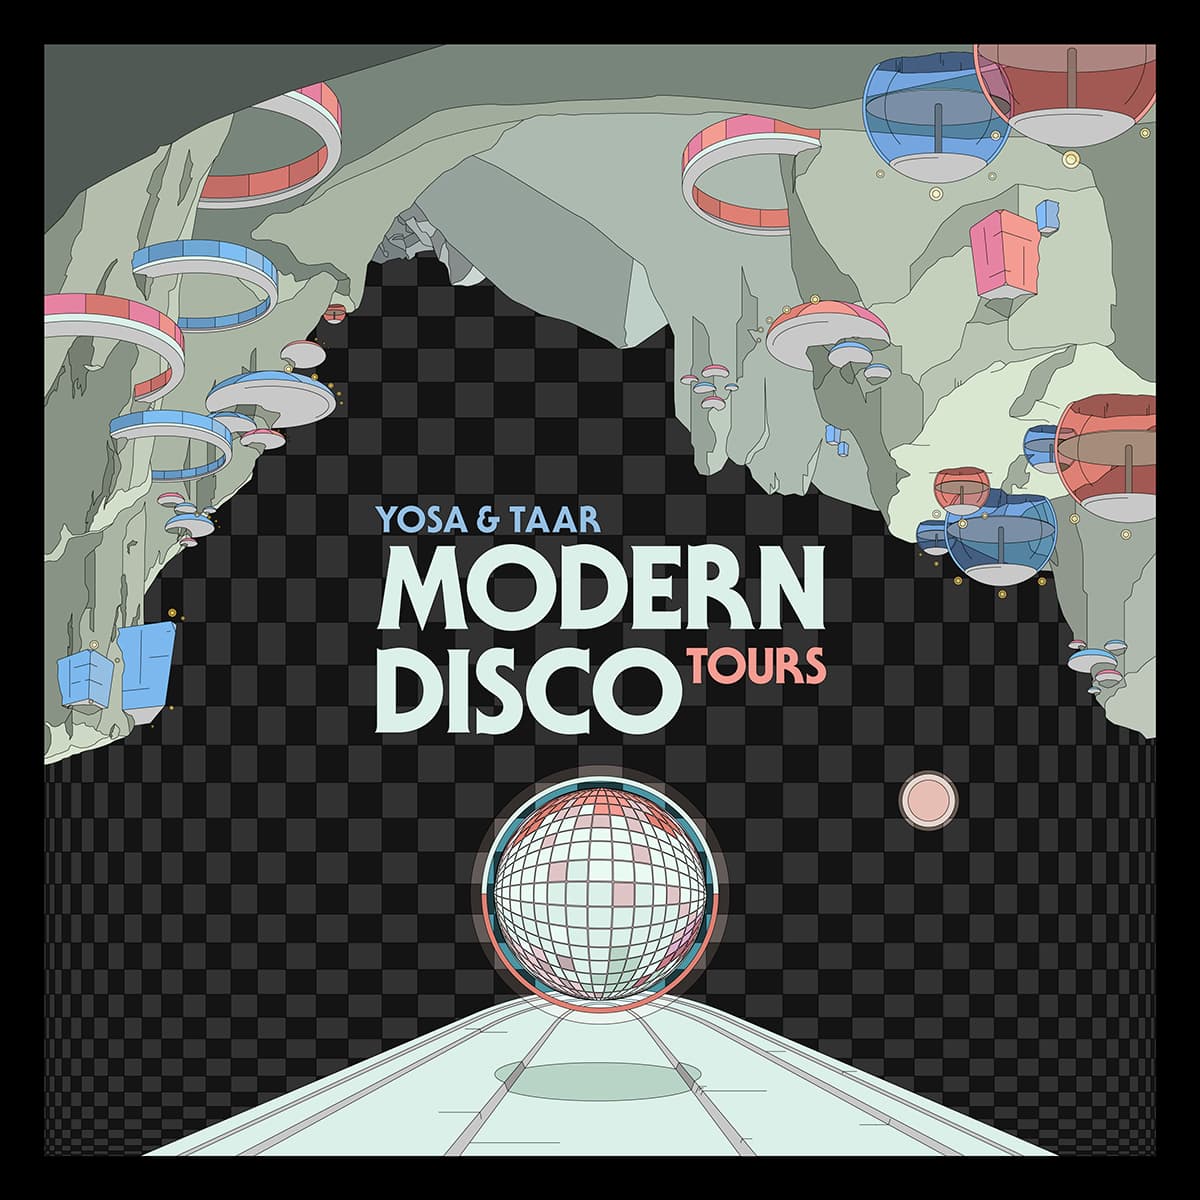 YOSA & TAAR's 1st album "Modern Disco Tours" has been released, and the music video is also available.